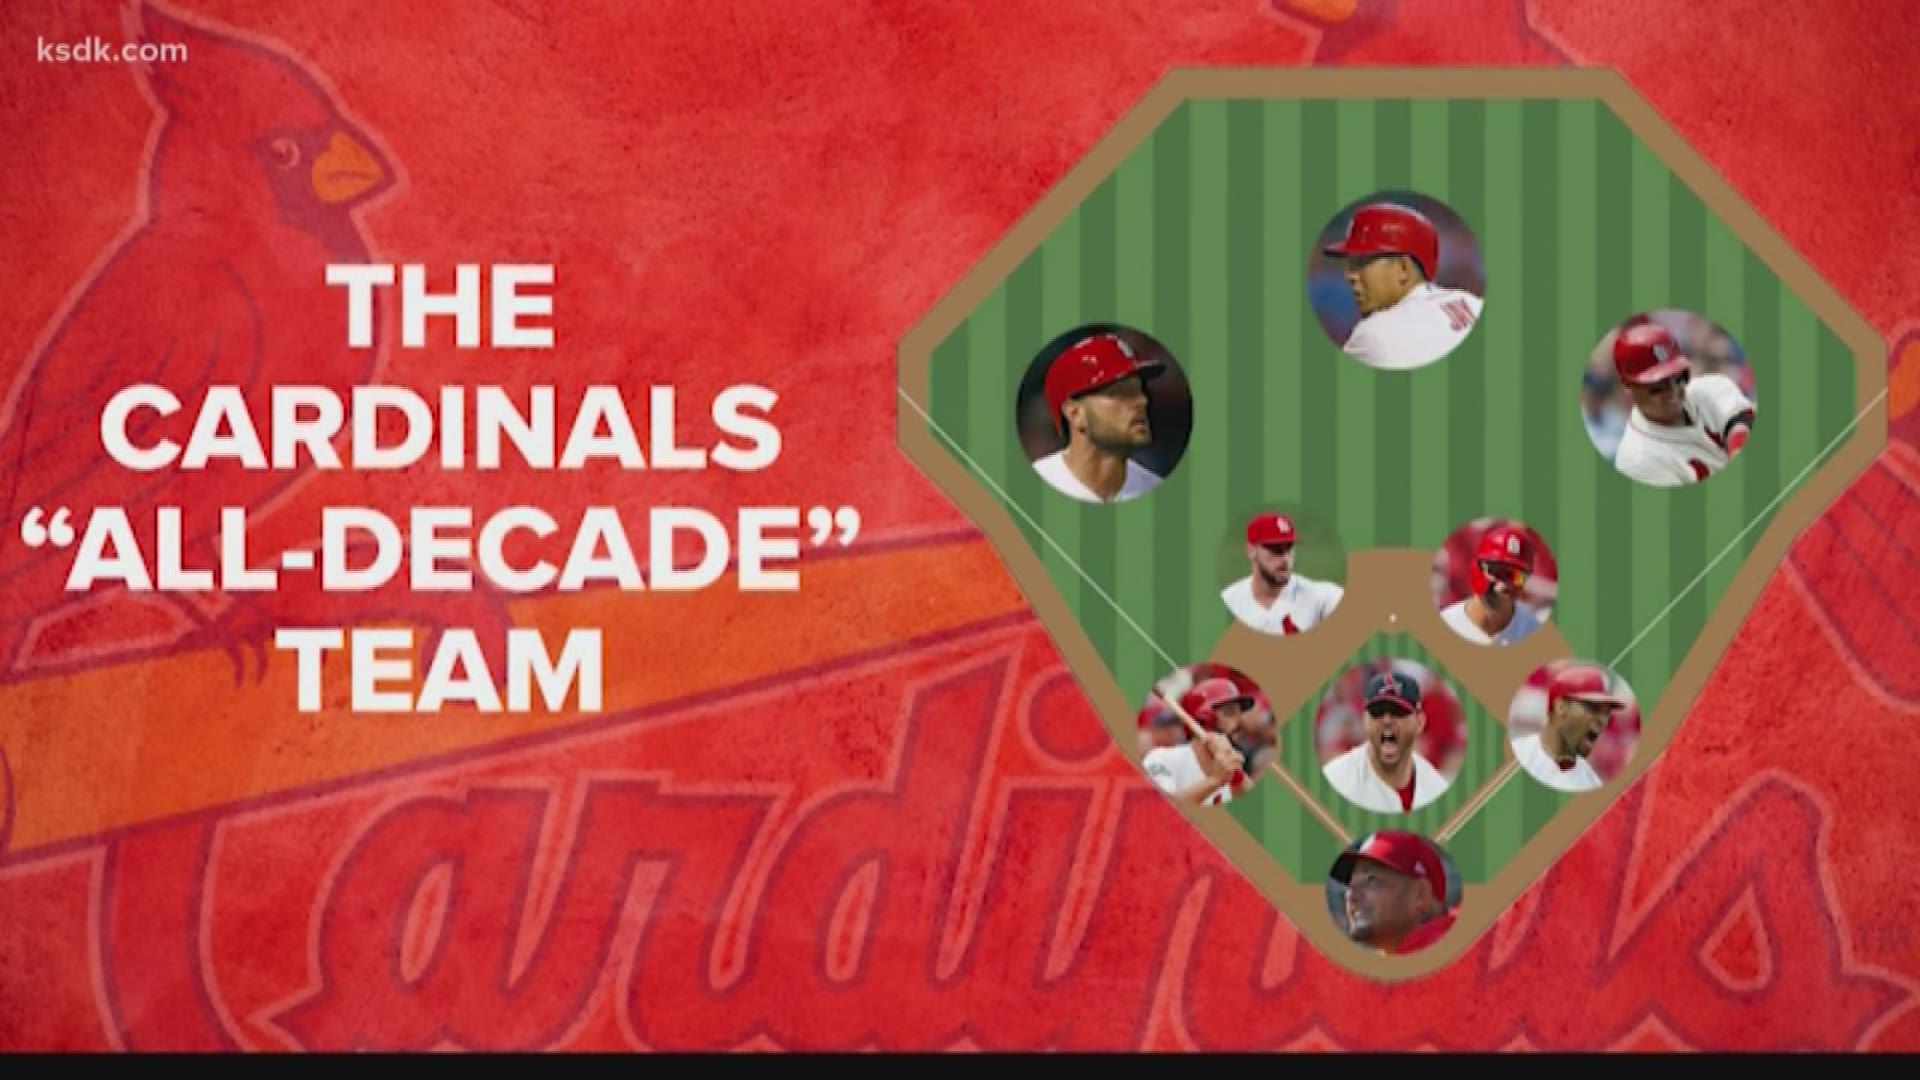 What do you think of our All-Decade team?